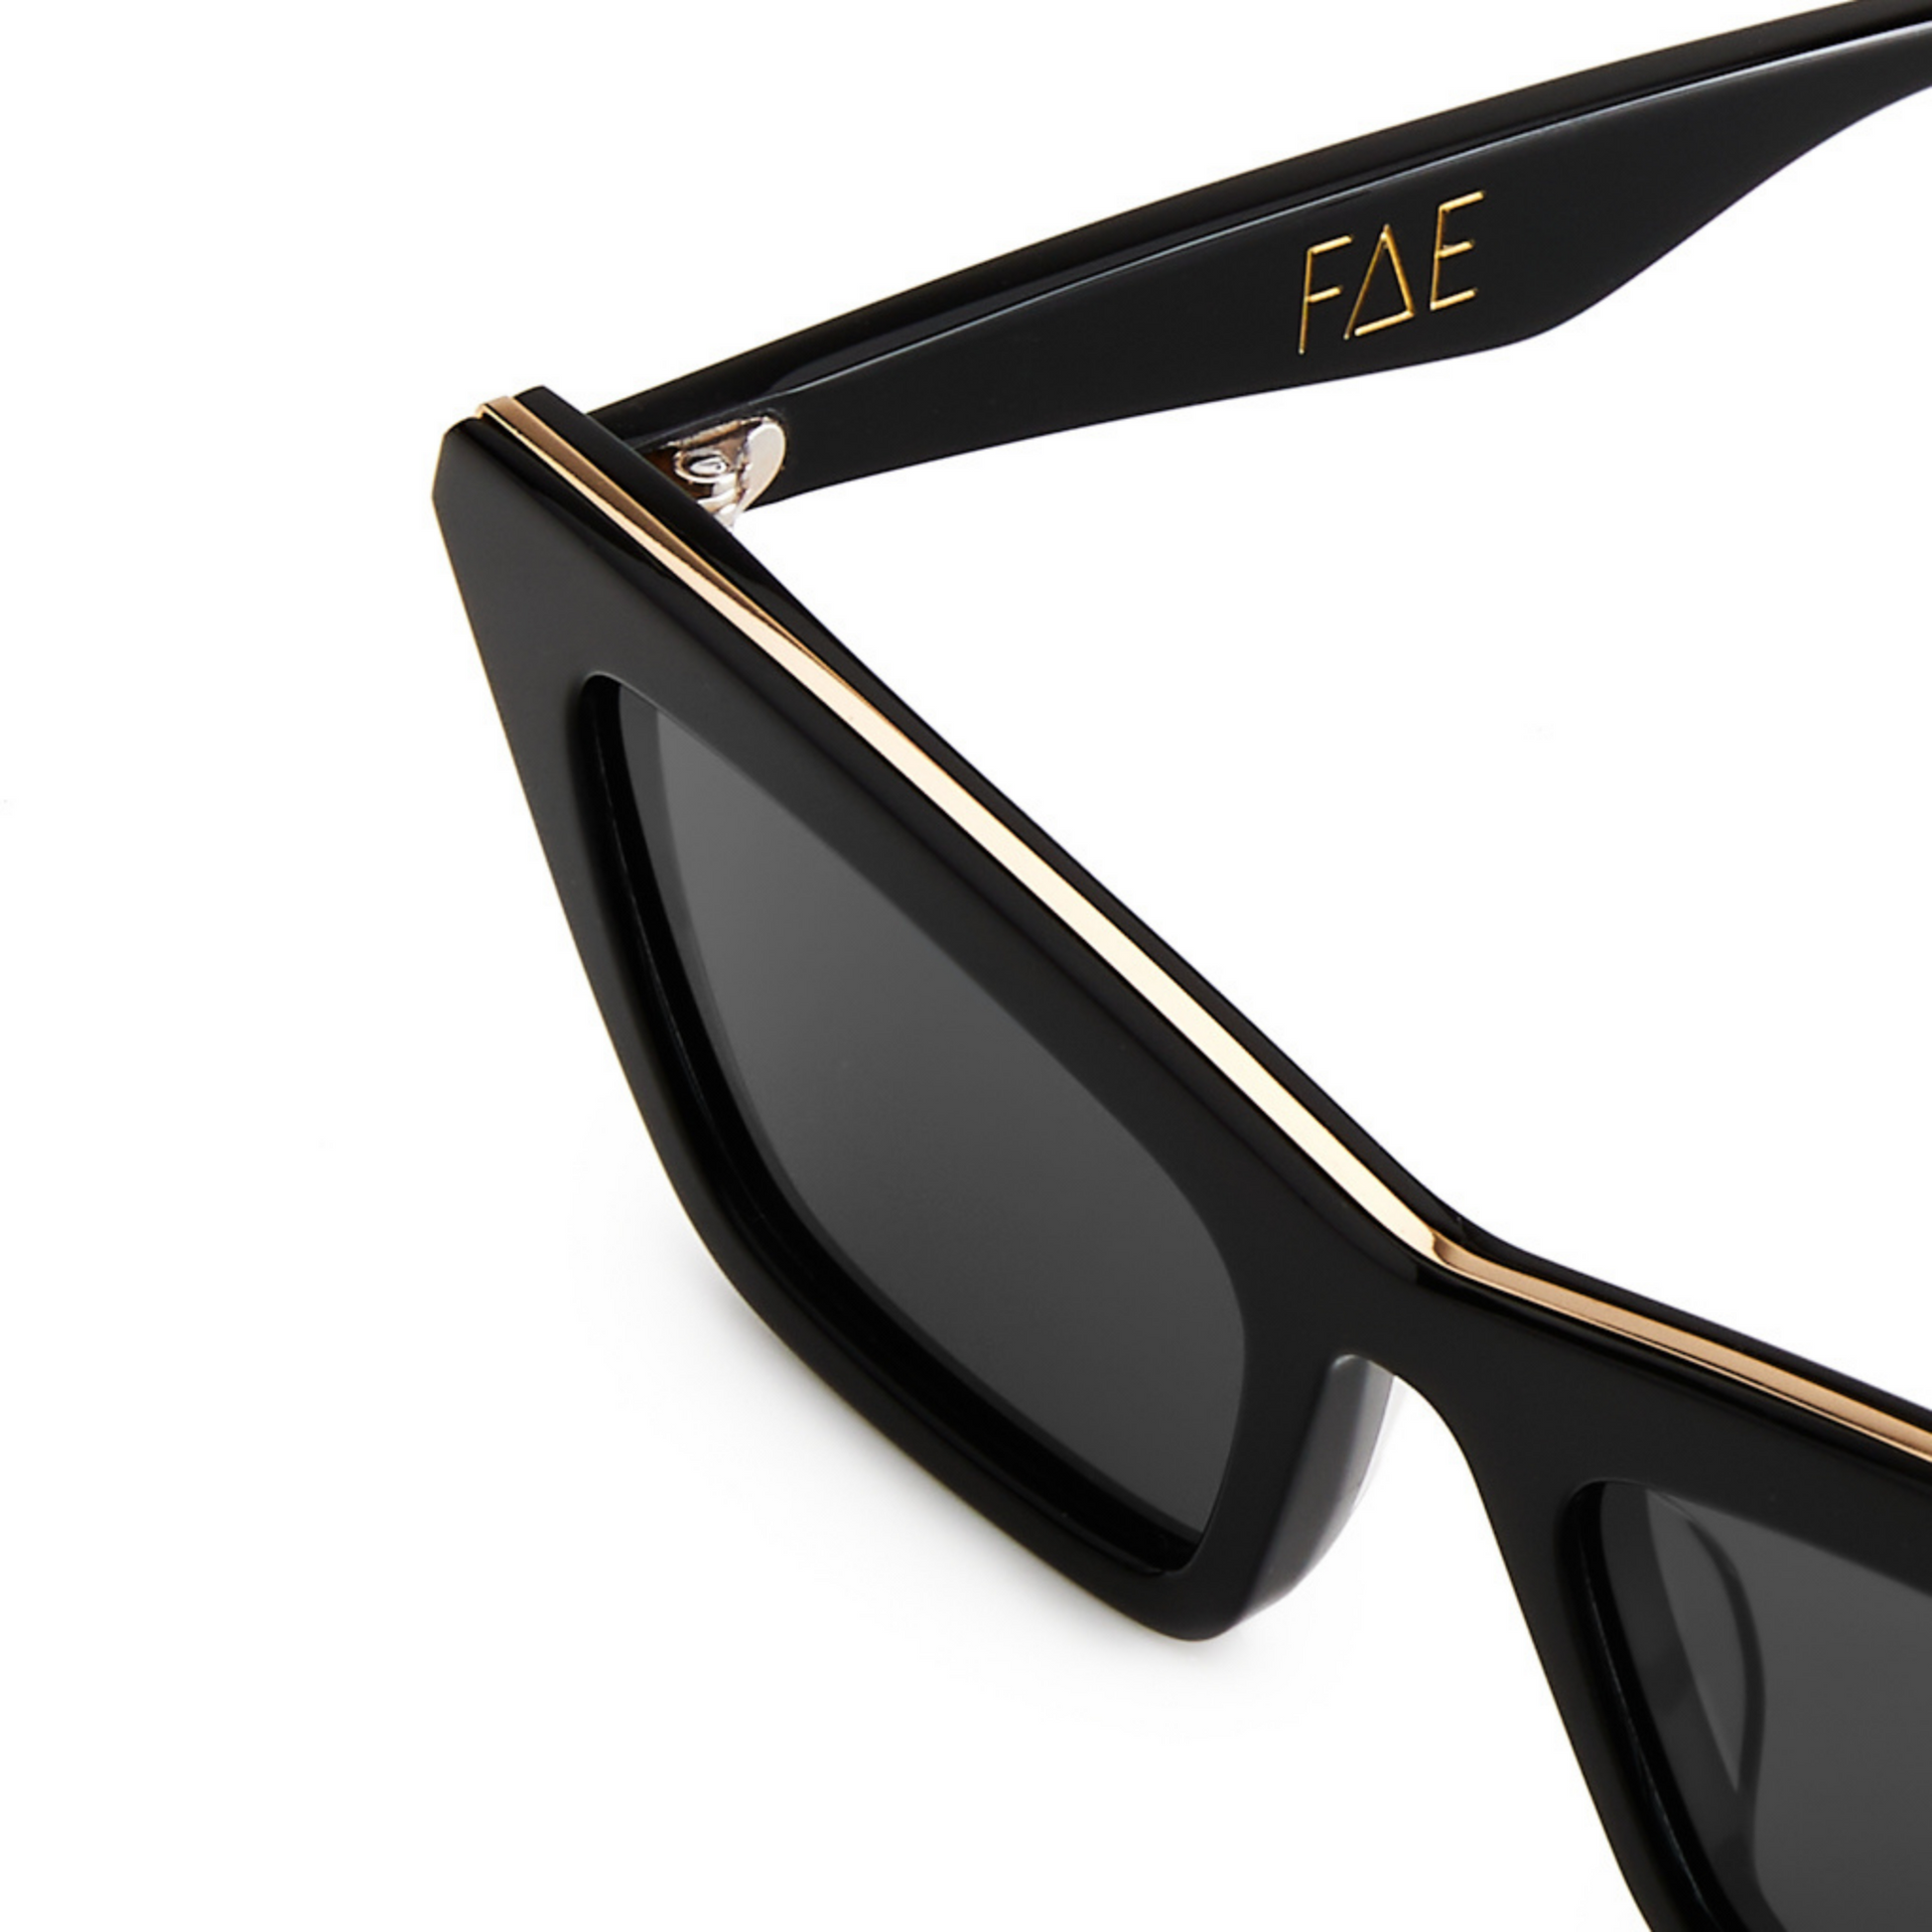 The FAE is a brand new SS/22 style to the OXF range, a predominately female frame with the design inspired by a 60's style cats eye with gold details and modern bevelling. Created 100% in-house within the Oscar & Frank Design Lab.